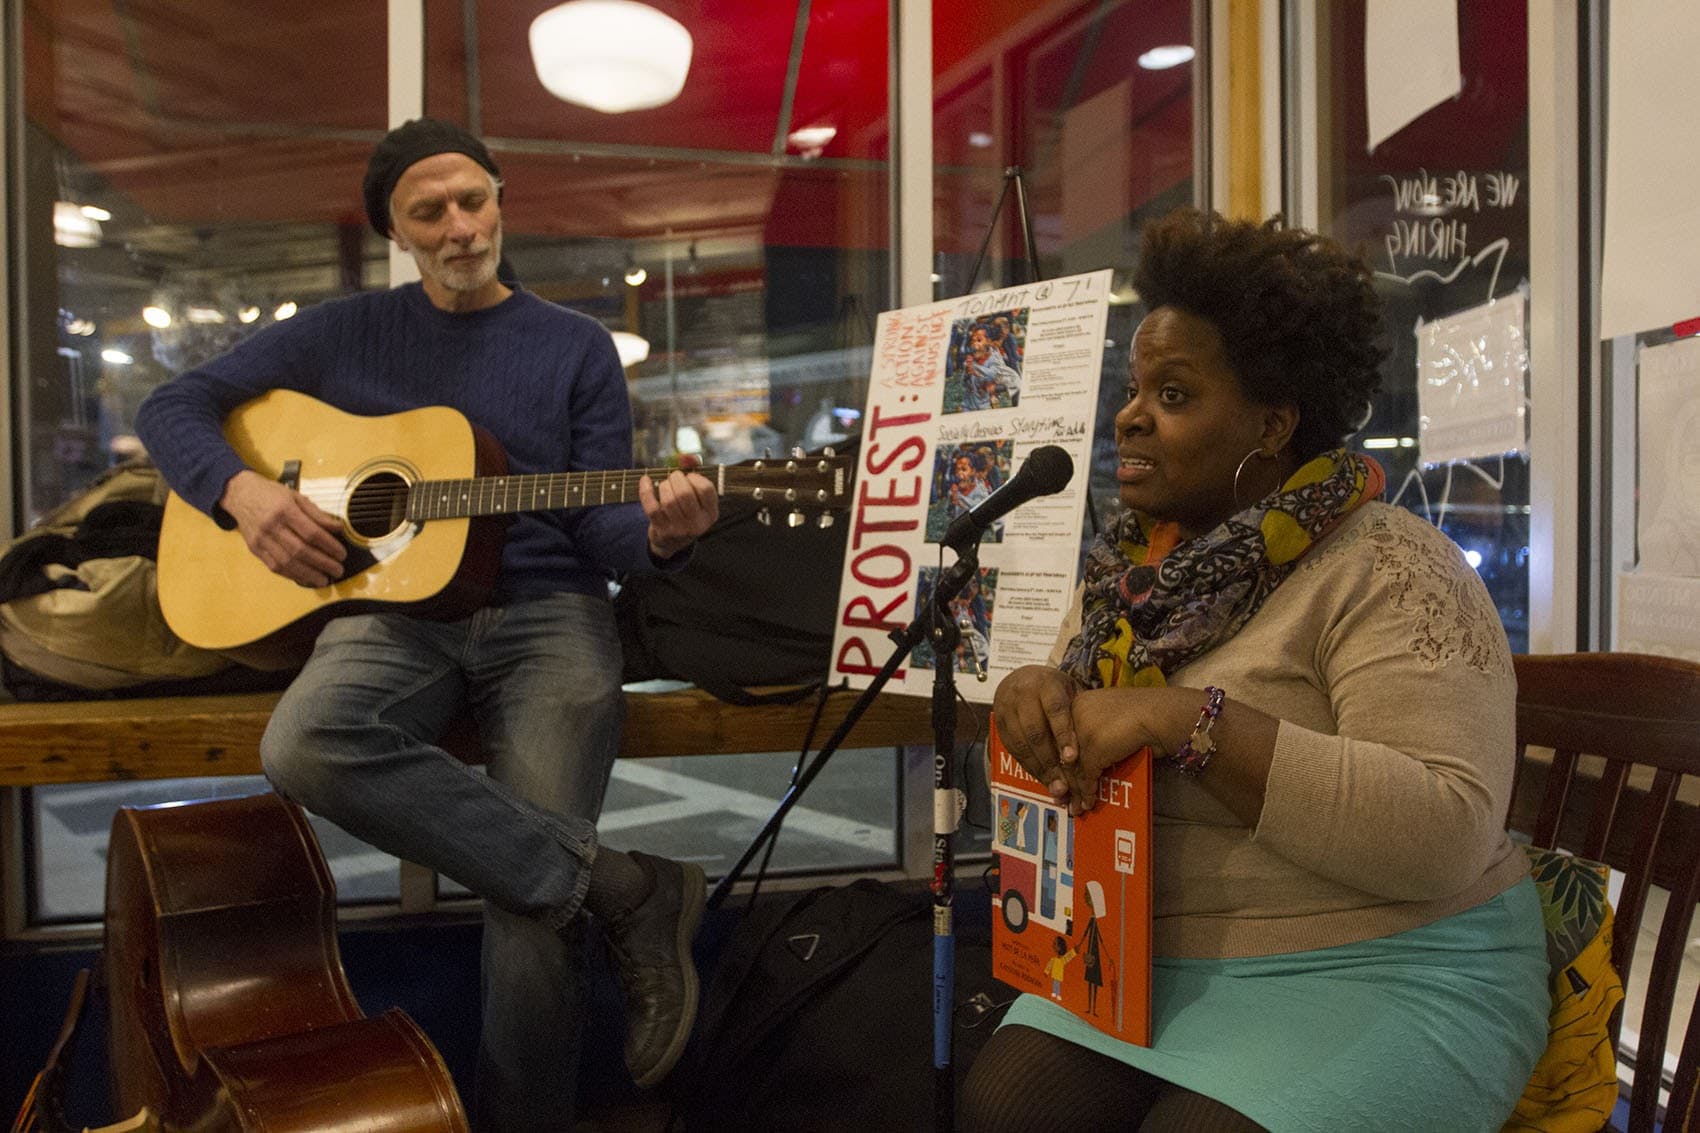 Tanya Nixon-Silberg, storyteller and co-founder of Wee The People, reads stories with Jeffrey Benson providing background music, during a ResistARTS performance in early January. (Joe Difazio for WBUR.)